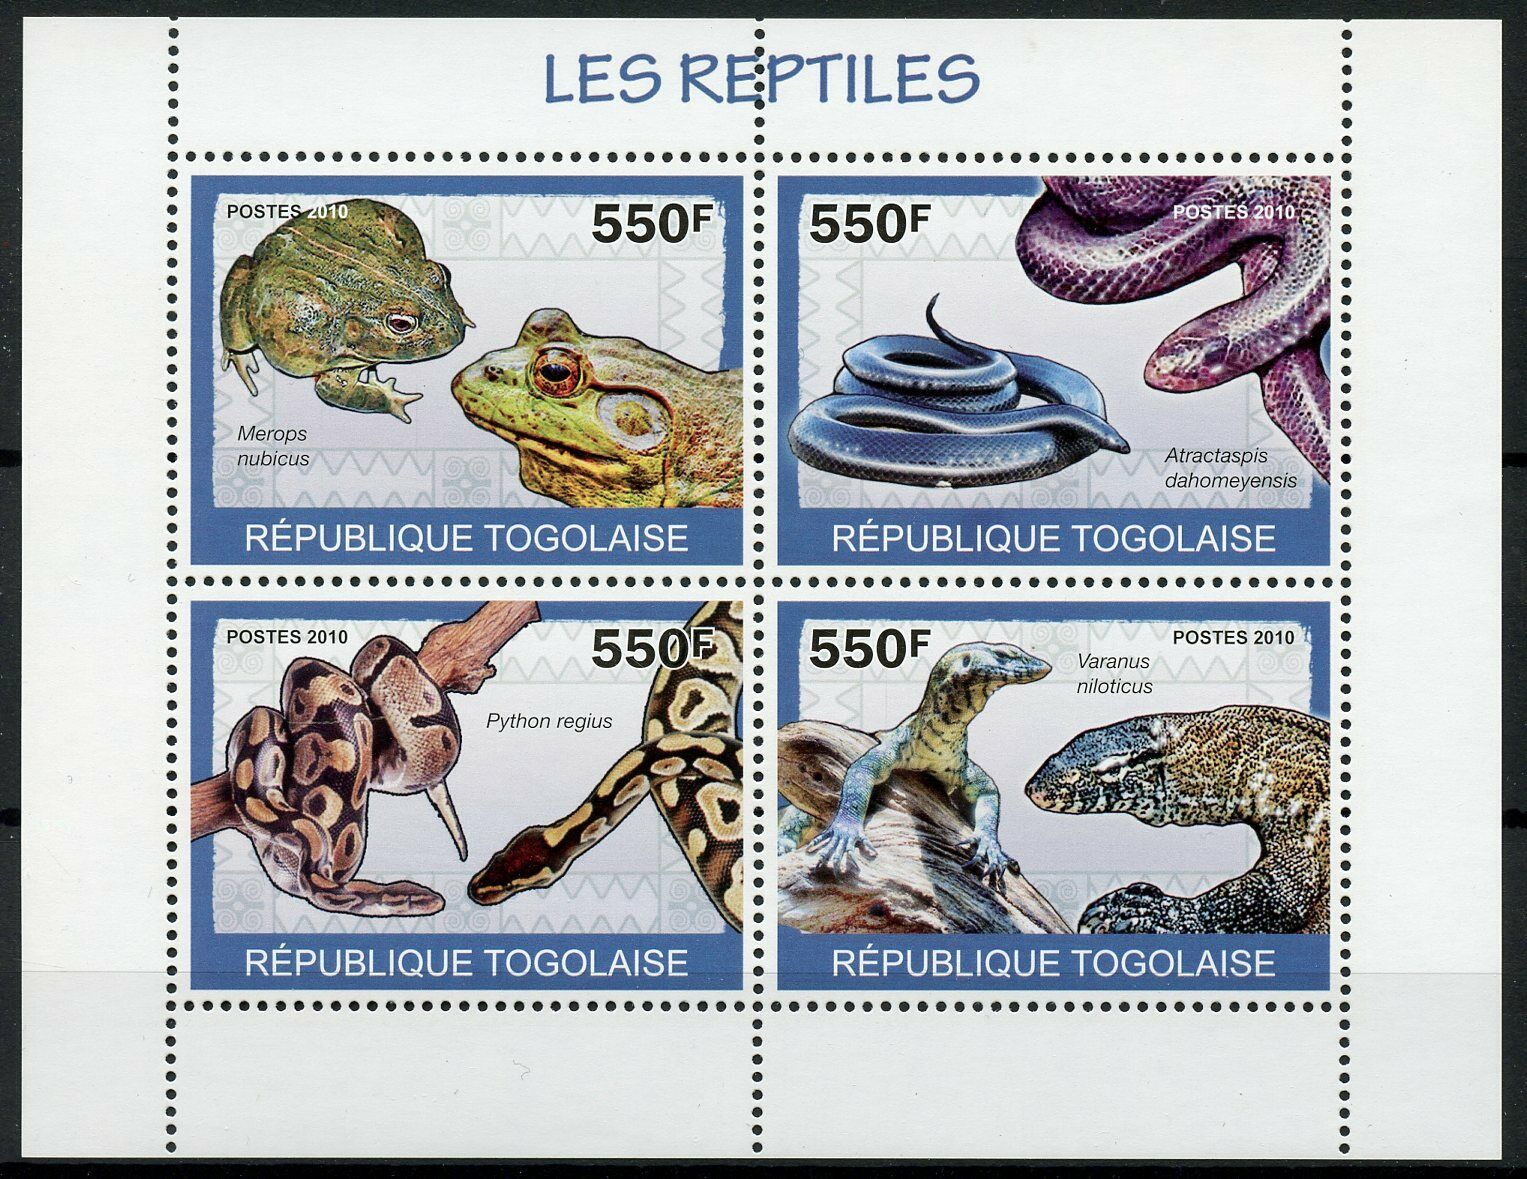 Togo Reptiles Stamps 2010 MNH Frogs Snakes Lizards Nile Monitor 4v M/S